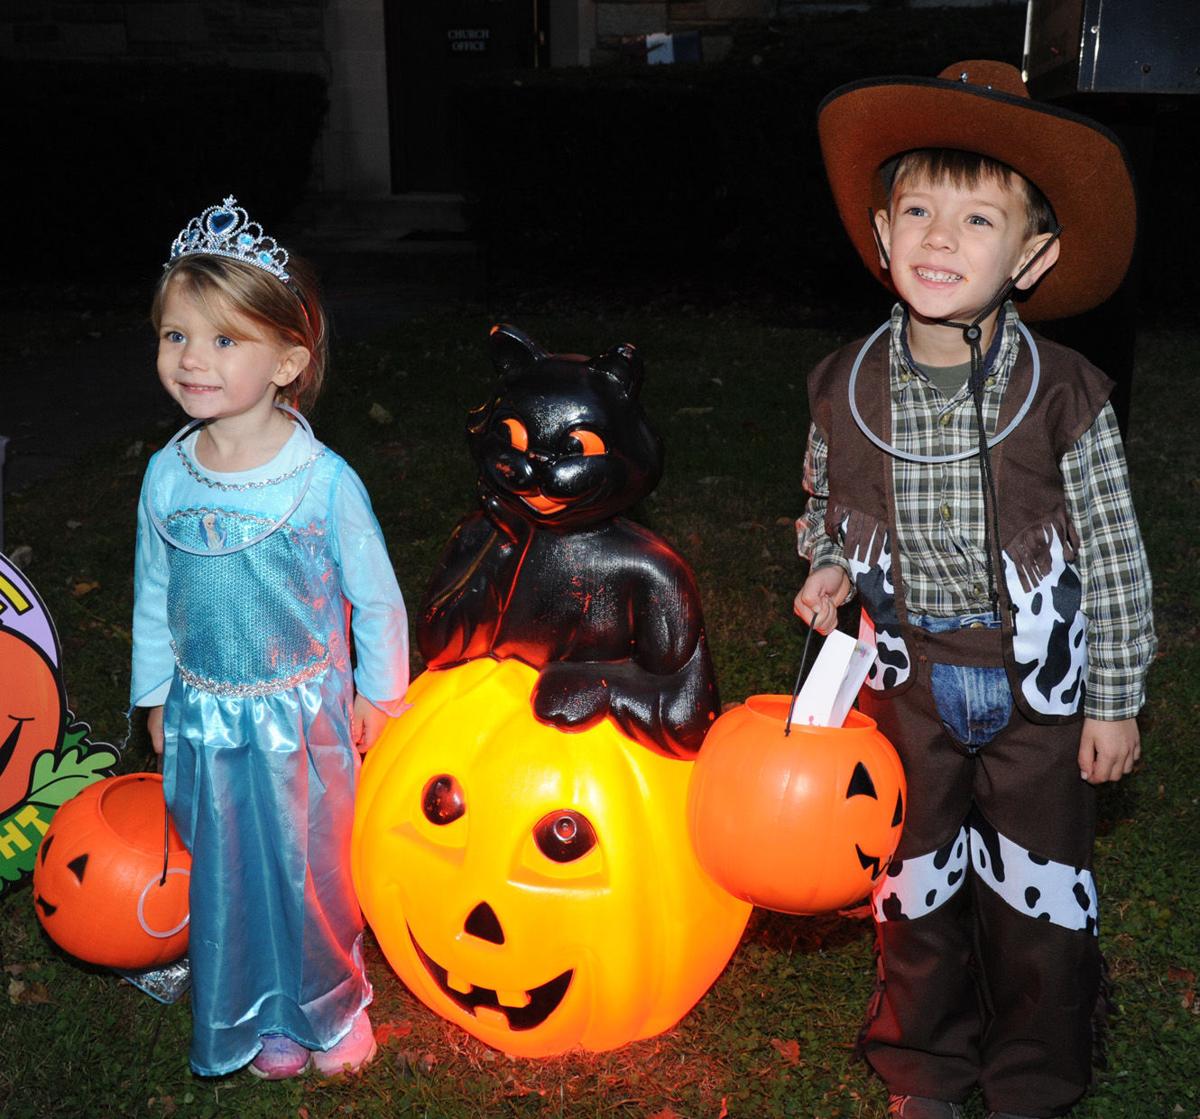 Update Upper Allen Latest To Reschedule Trick Or Treat Due To Weather Forecast The Sentinel News Cumberlink Com